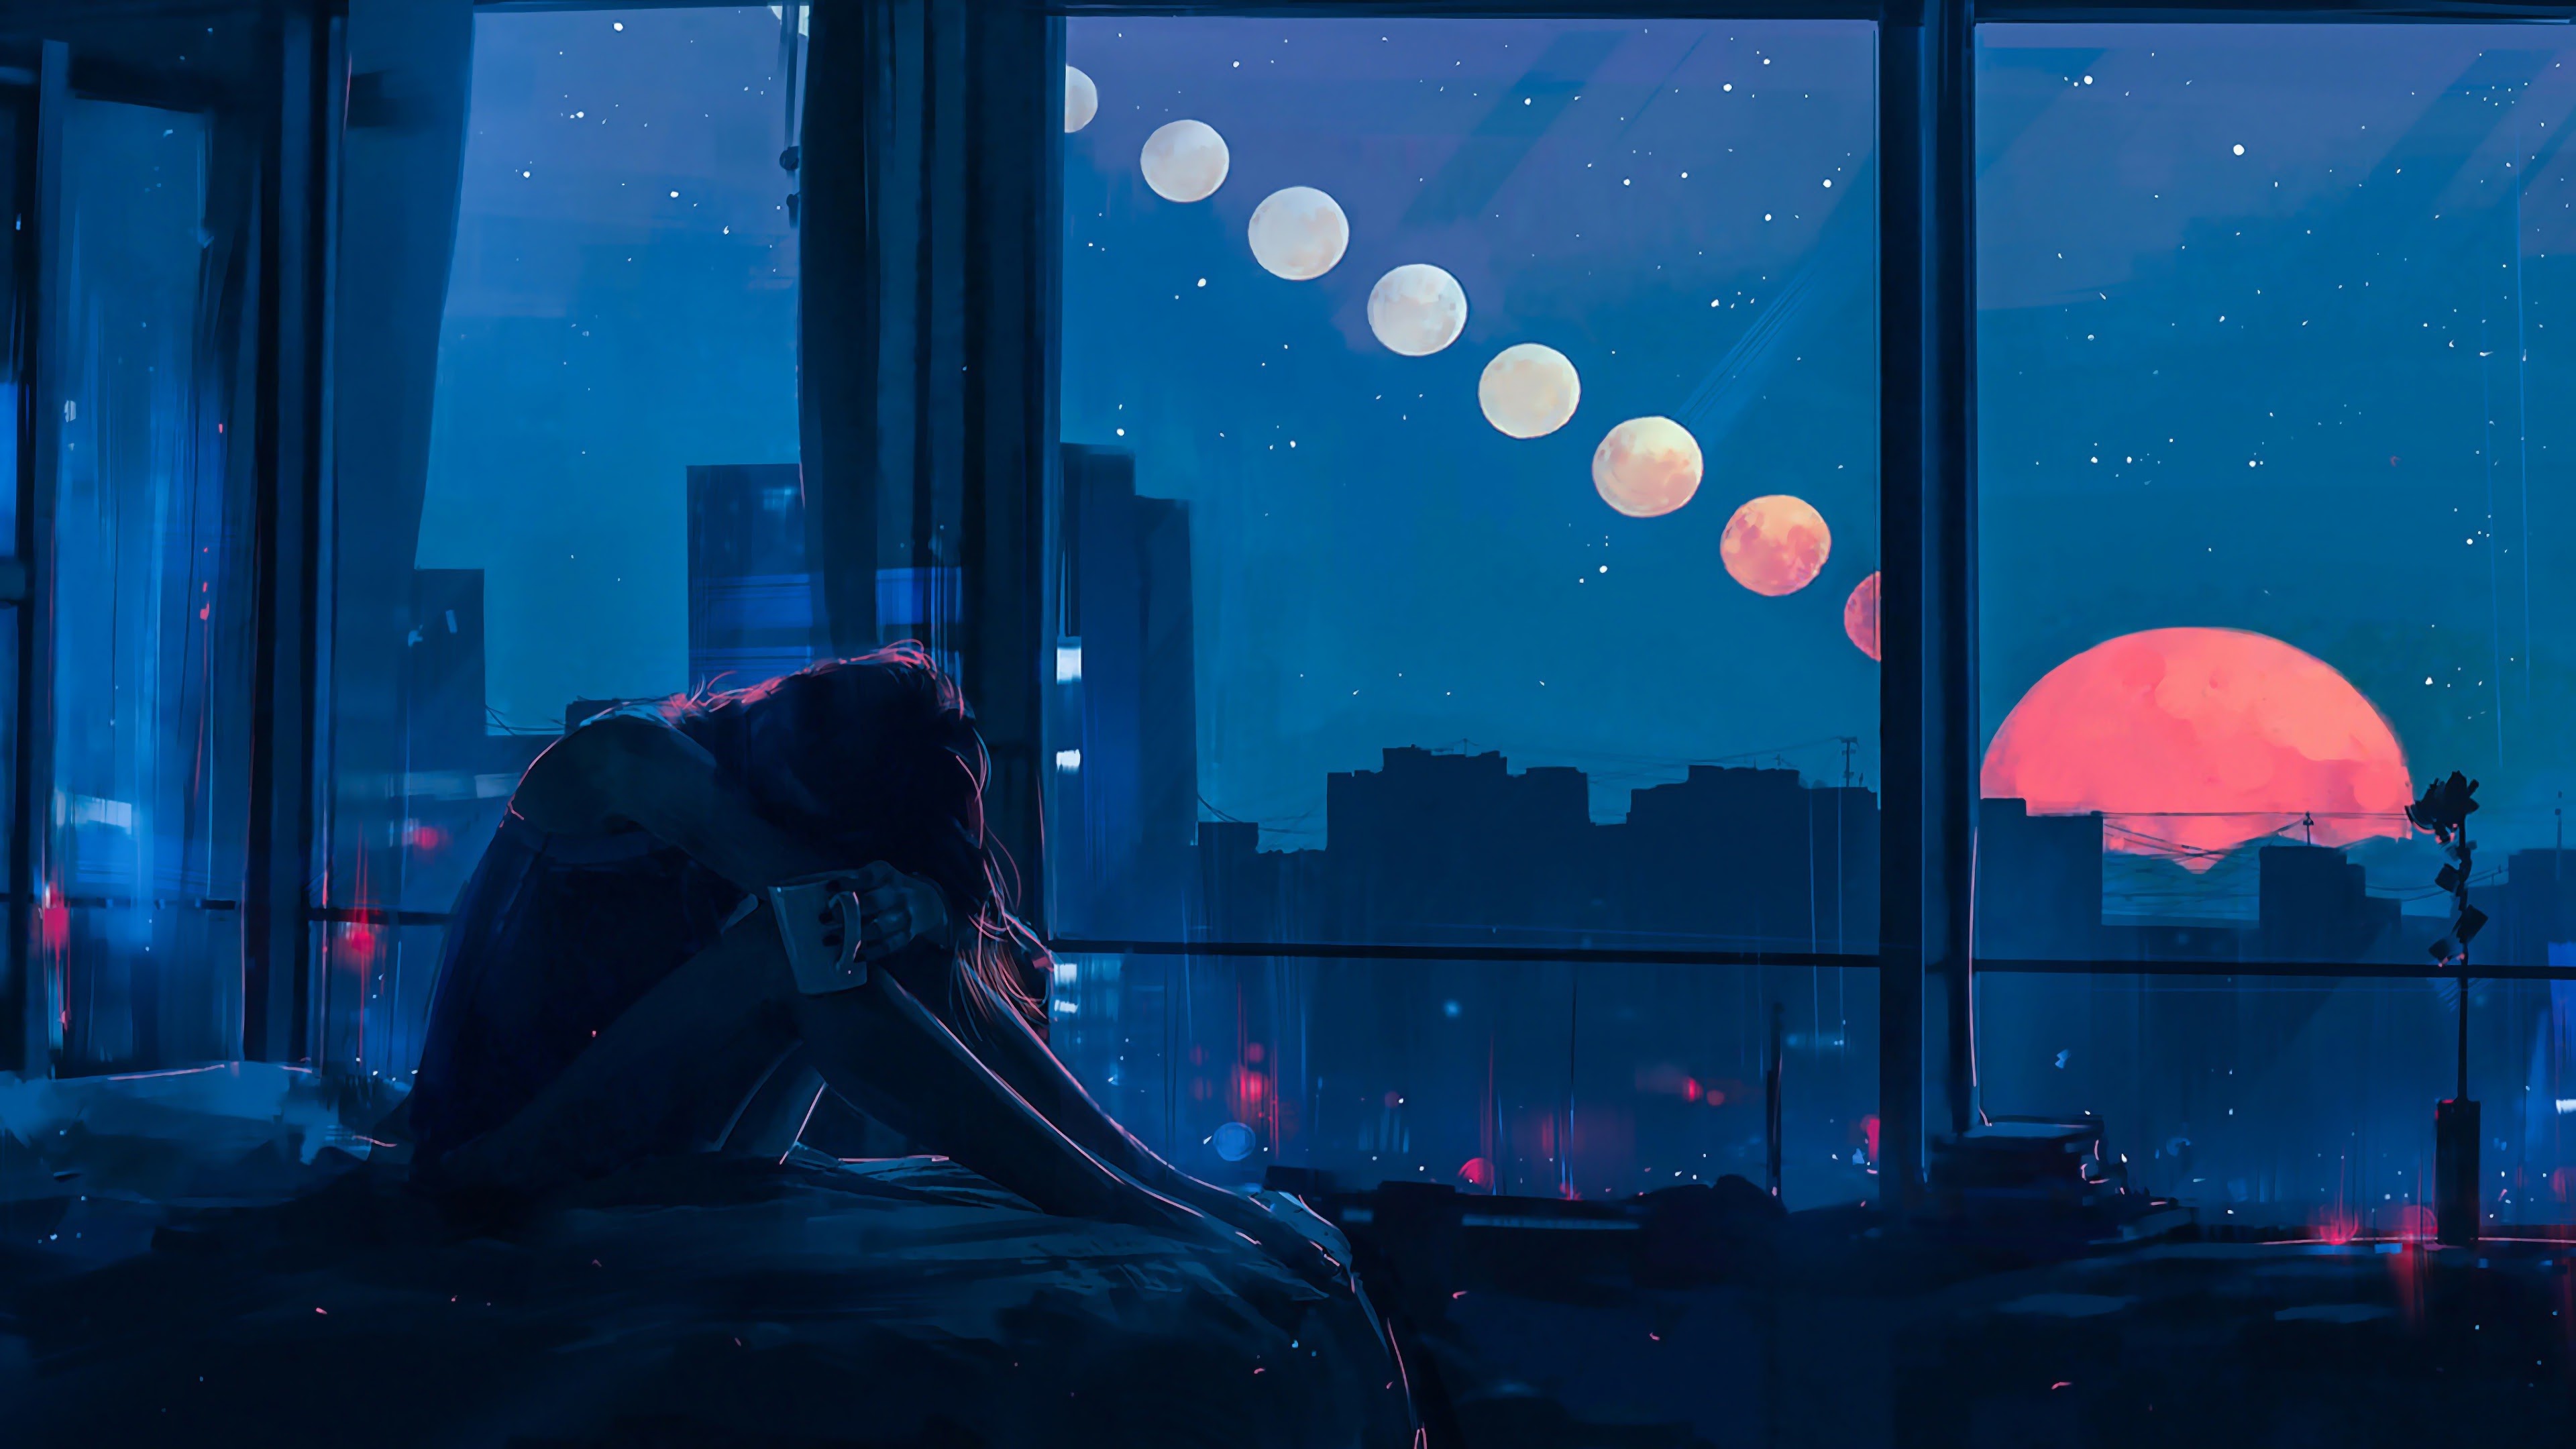 Lonely Girl Starring Shooting Star Wallpapers